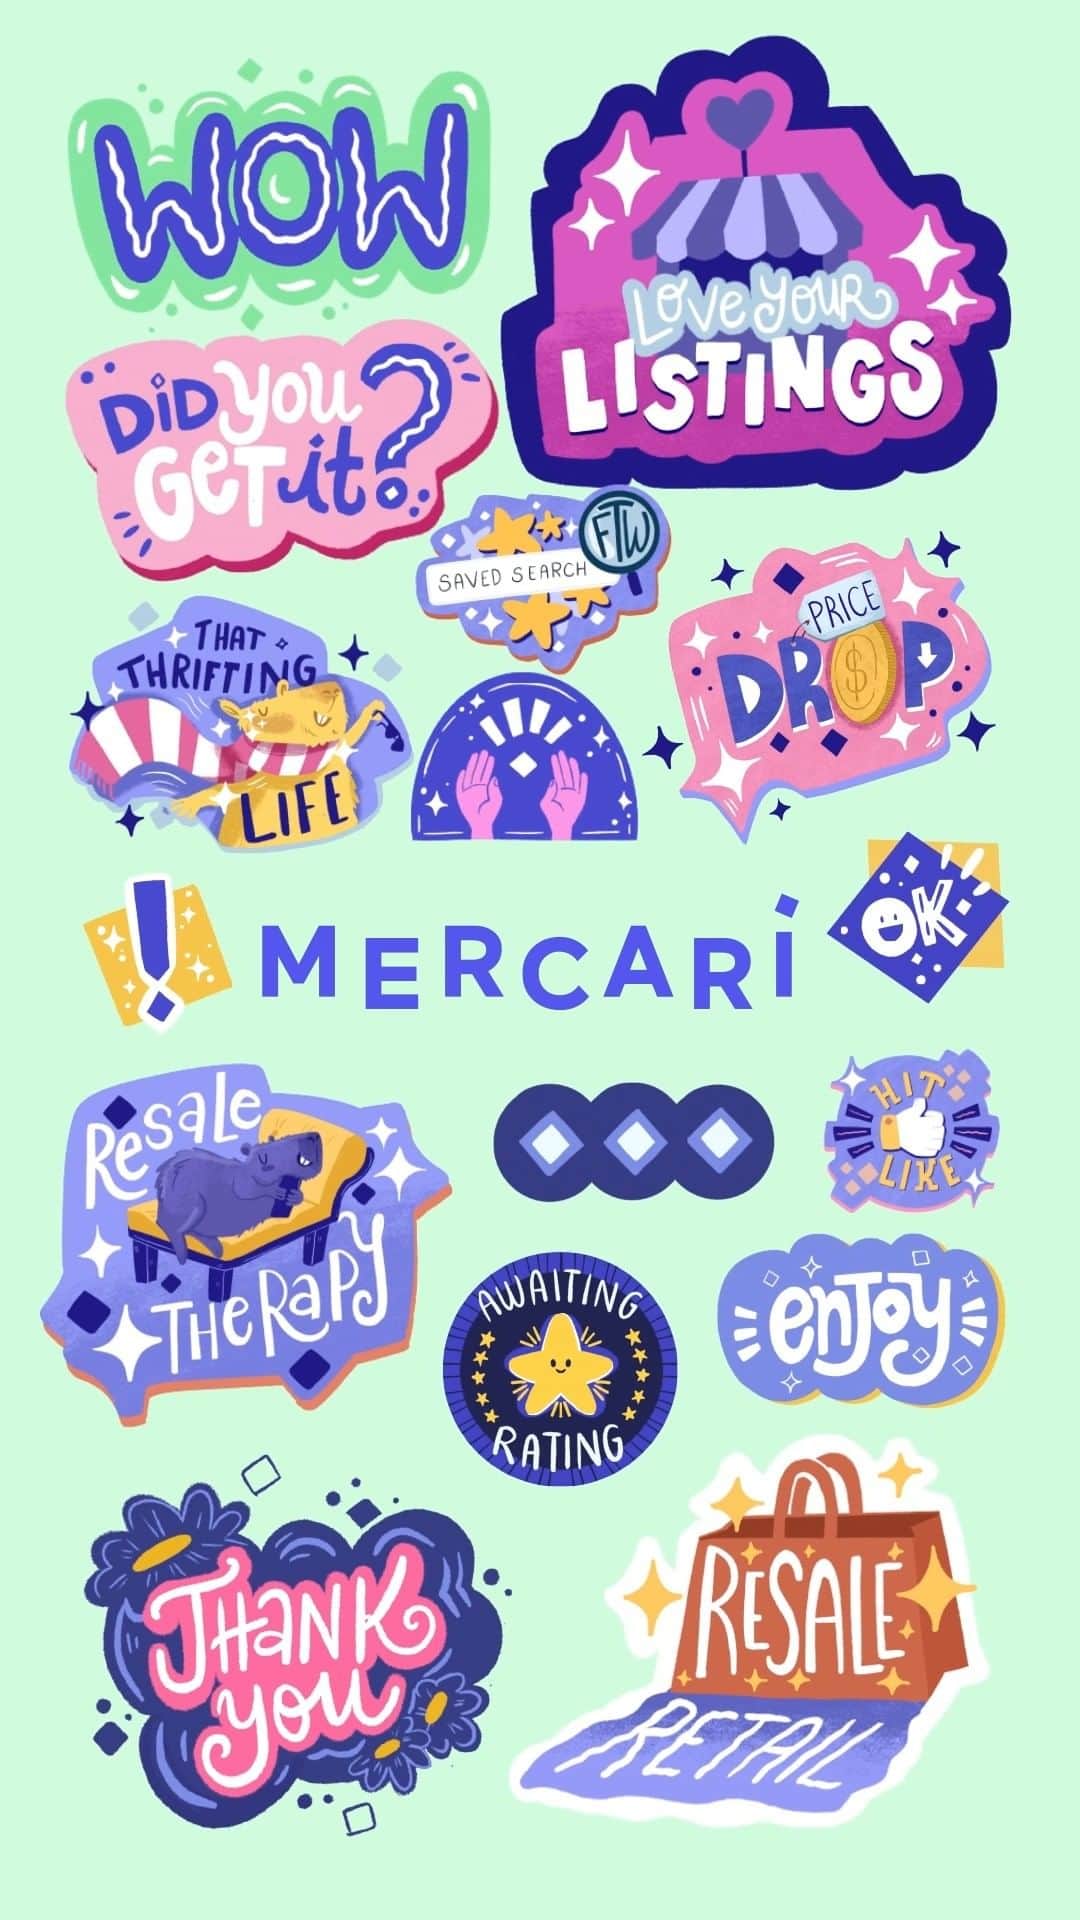 Mercariのインスタグラム：「Chatting with shoppers and sellers just got faster and more fun! Your new stickers (created by the wonderful artists @carolrempto and @lorenagiostri) are available in messaging, today.」